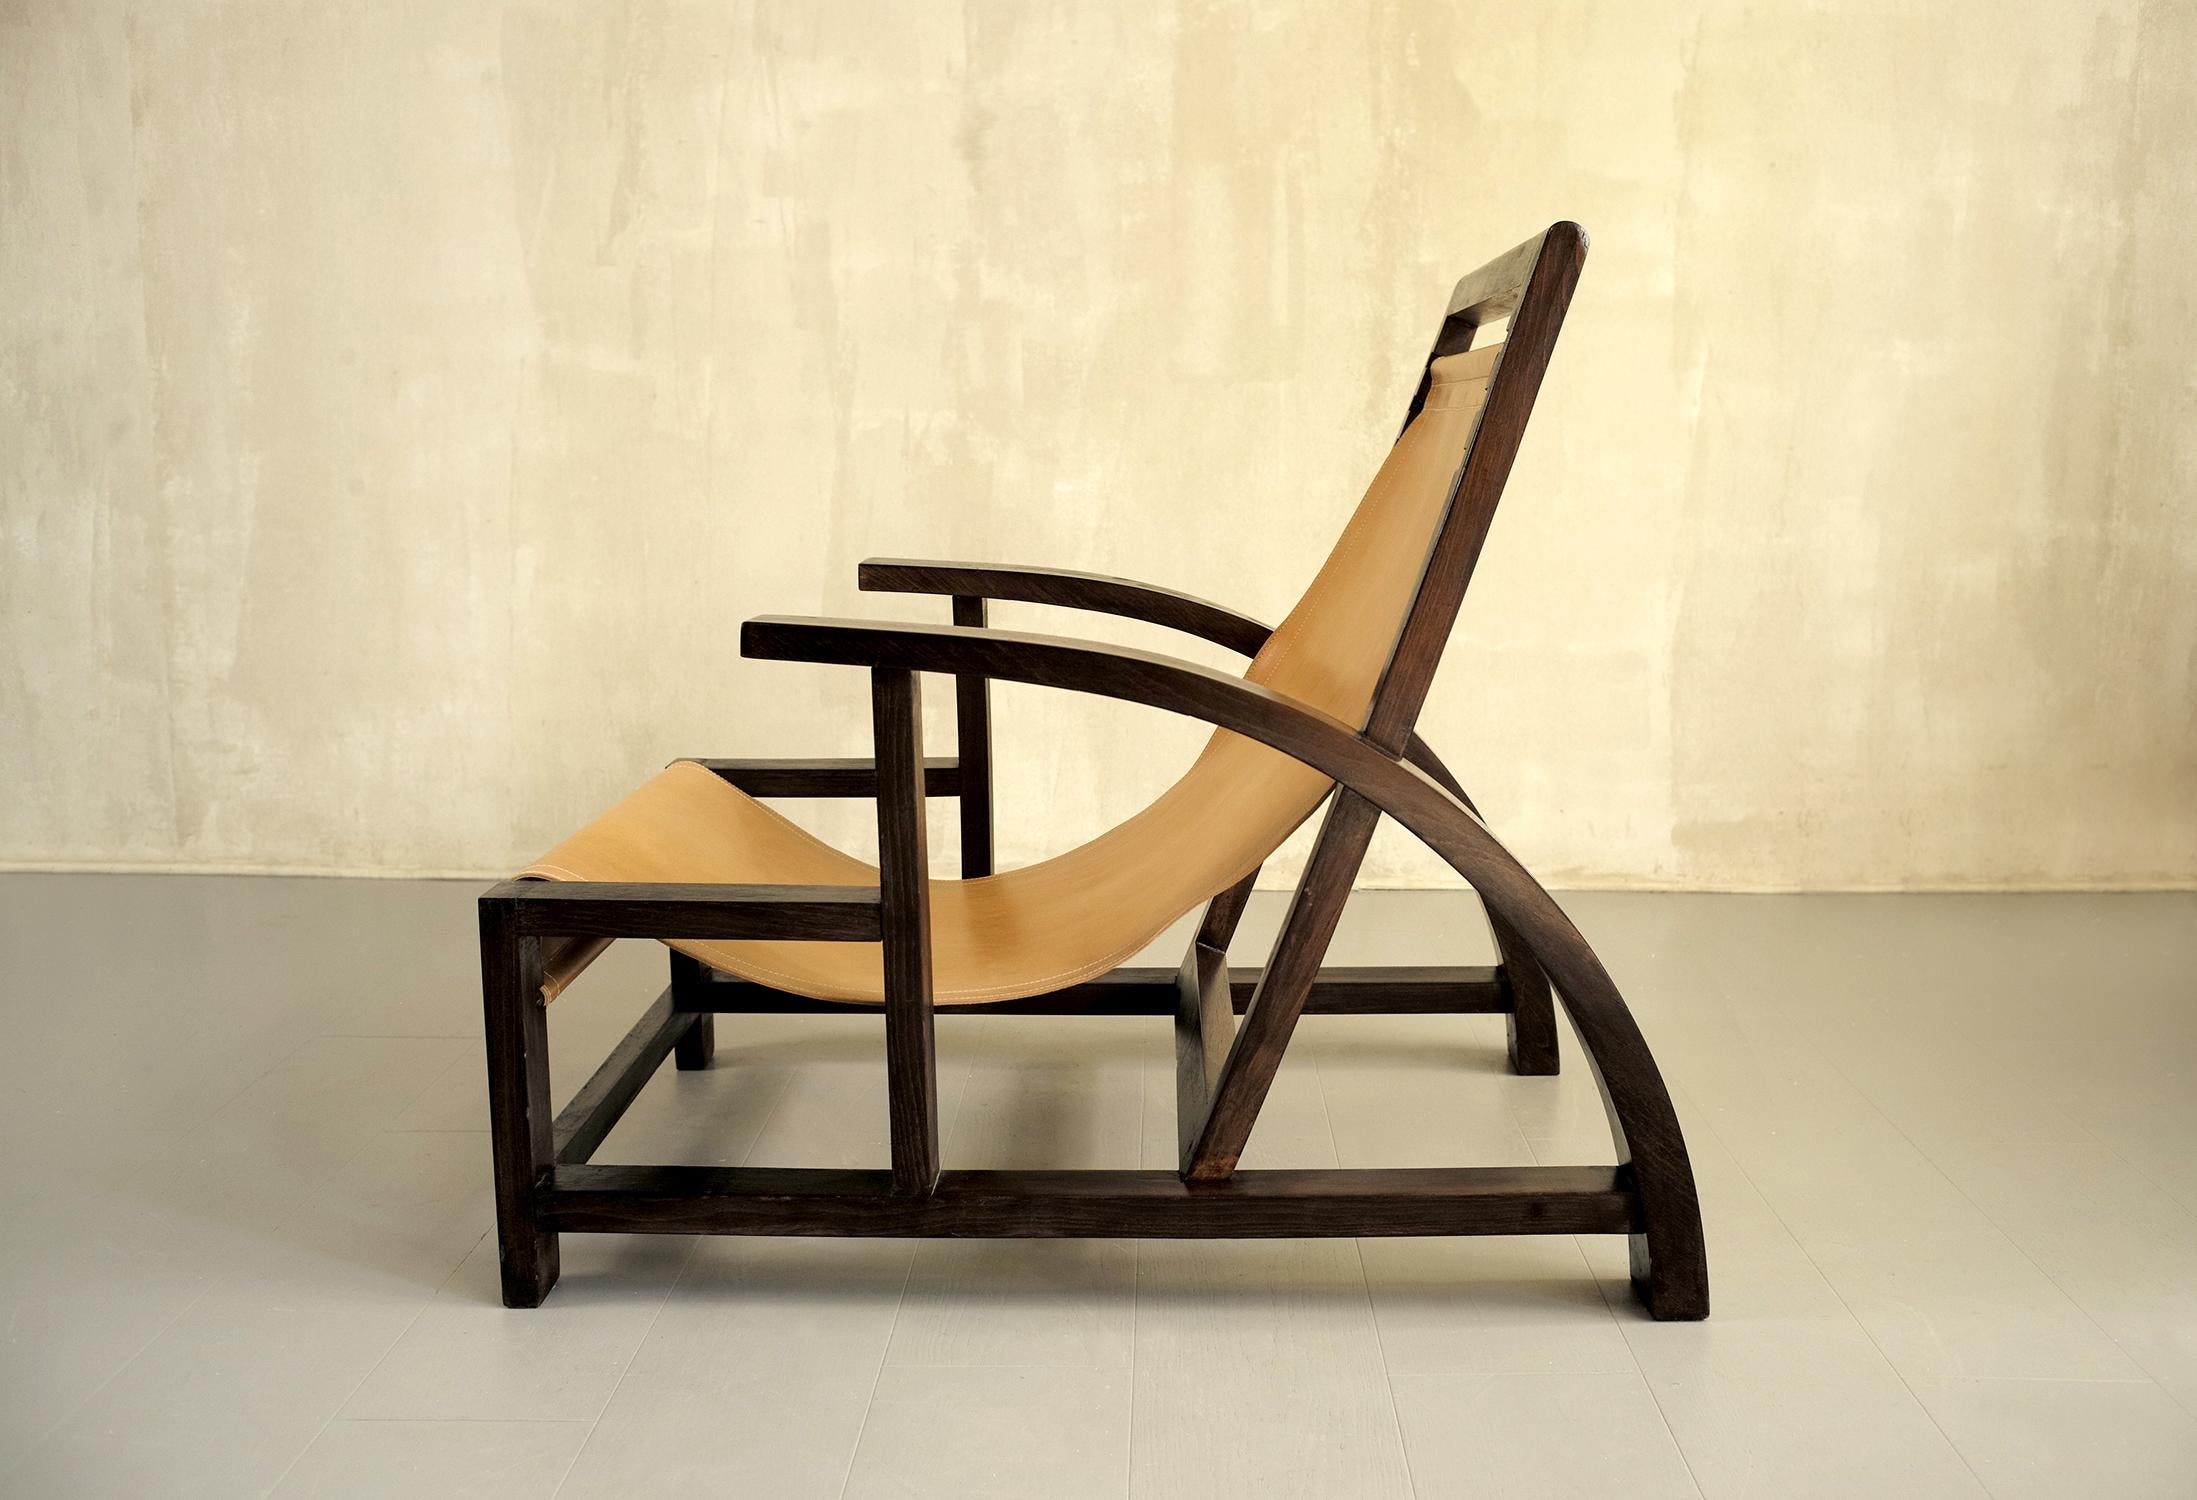 Large armchair in blackened wood and stretched leather, 1930. The modernist design alternates the arcuate curve of the armrests, the diagonal of the backrest, and the vertical and horizontal planes of the base. The seat consists of a strip of